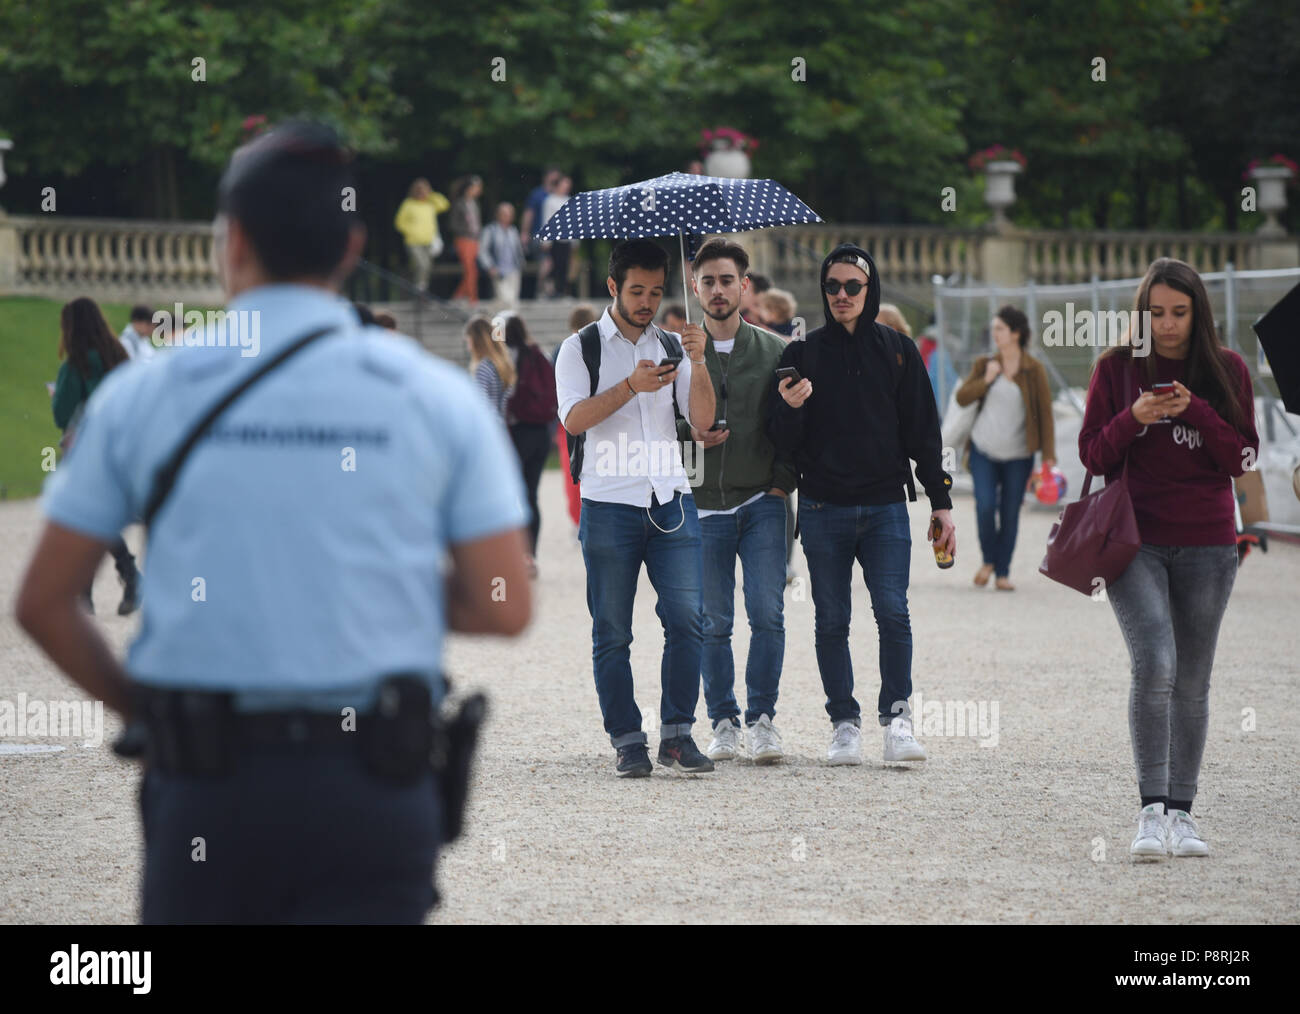 July 14, 2016 - Paris, France: Police look at youths taking part in a mass Pokemon hunt in the Luxembourg Garden in central Paris. Hundreds of players of the new Pokemon Go game showed up to take part in a massive hunt despite the authorities' attempt to cancel the event. Despite playing mostly solo, the Pokemon Go users enjoyed to interact and meet other players. Millions of users have already downloaded the game, which requires users to catch on-screen pokemon characters using their real-world location.  Des jeunes participent a une chasse au Pokemons dans le jardin du Luxembourg avec l'appl Stock Photo